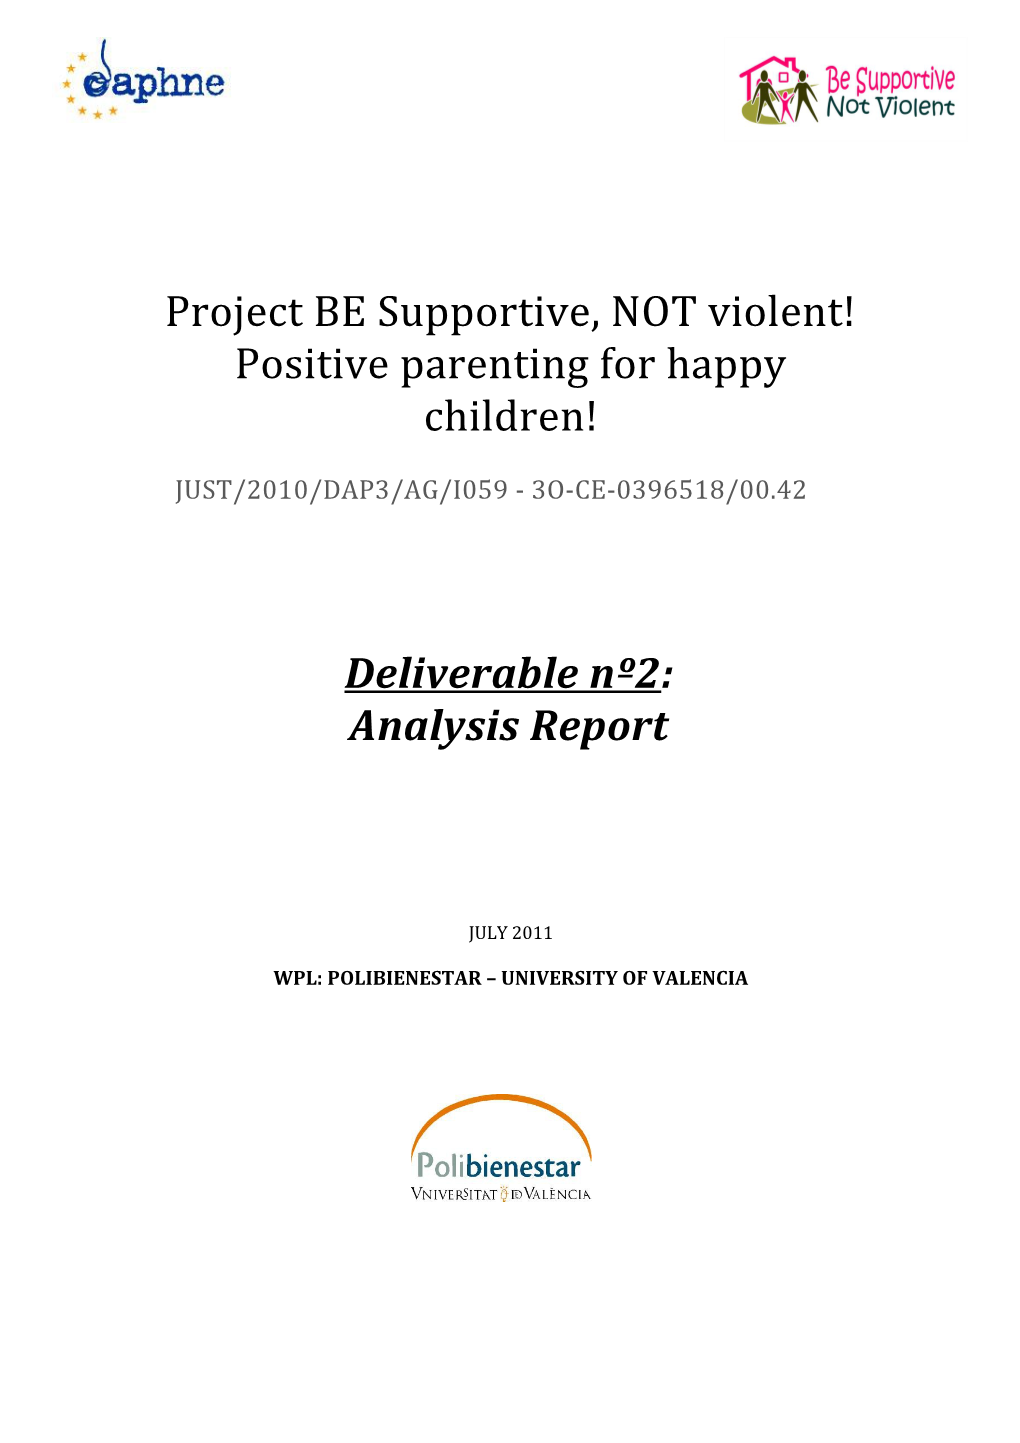 Project BE Supportive, NOT Violent